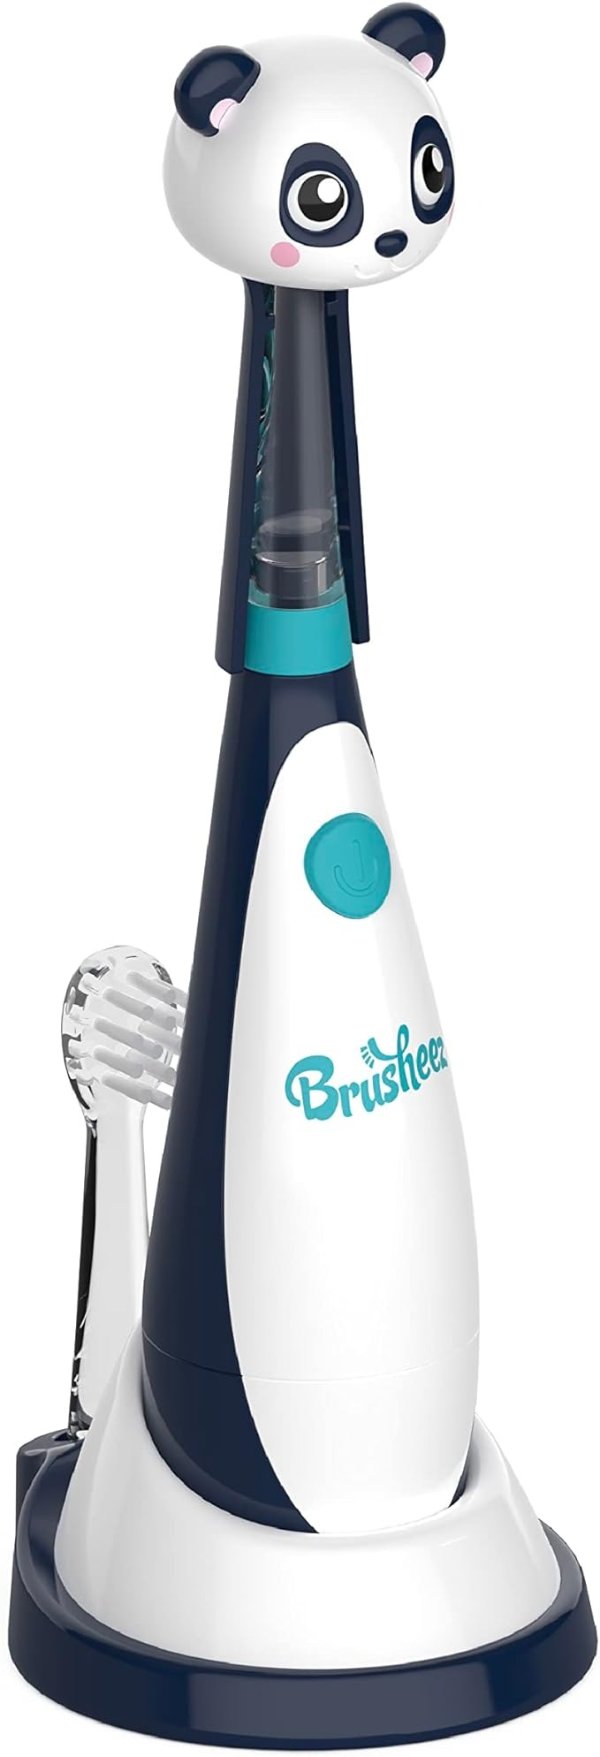 Little Toddlers Sonic Toothbrush - Safe & Gentle Toothbrush for Ages 1-3 with Built-in, Light-Up 2-Minute Timer, Extra Brush Head, & Storage Base for First-Time Brushers (Parker The Panda)